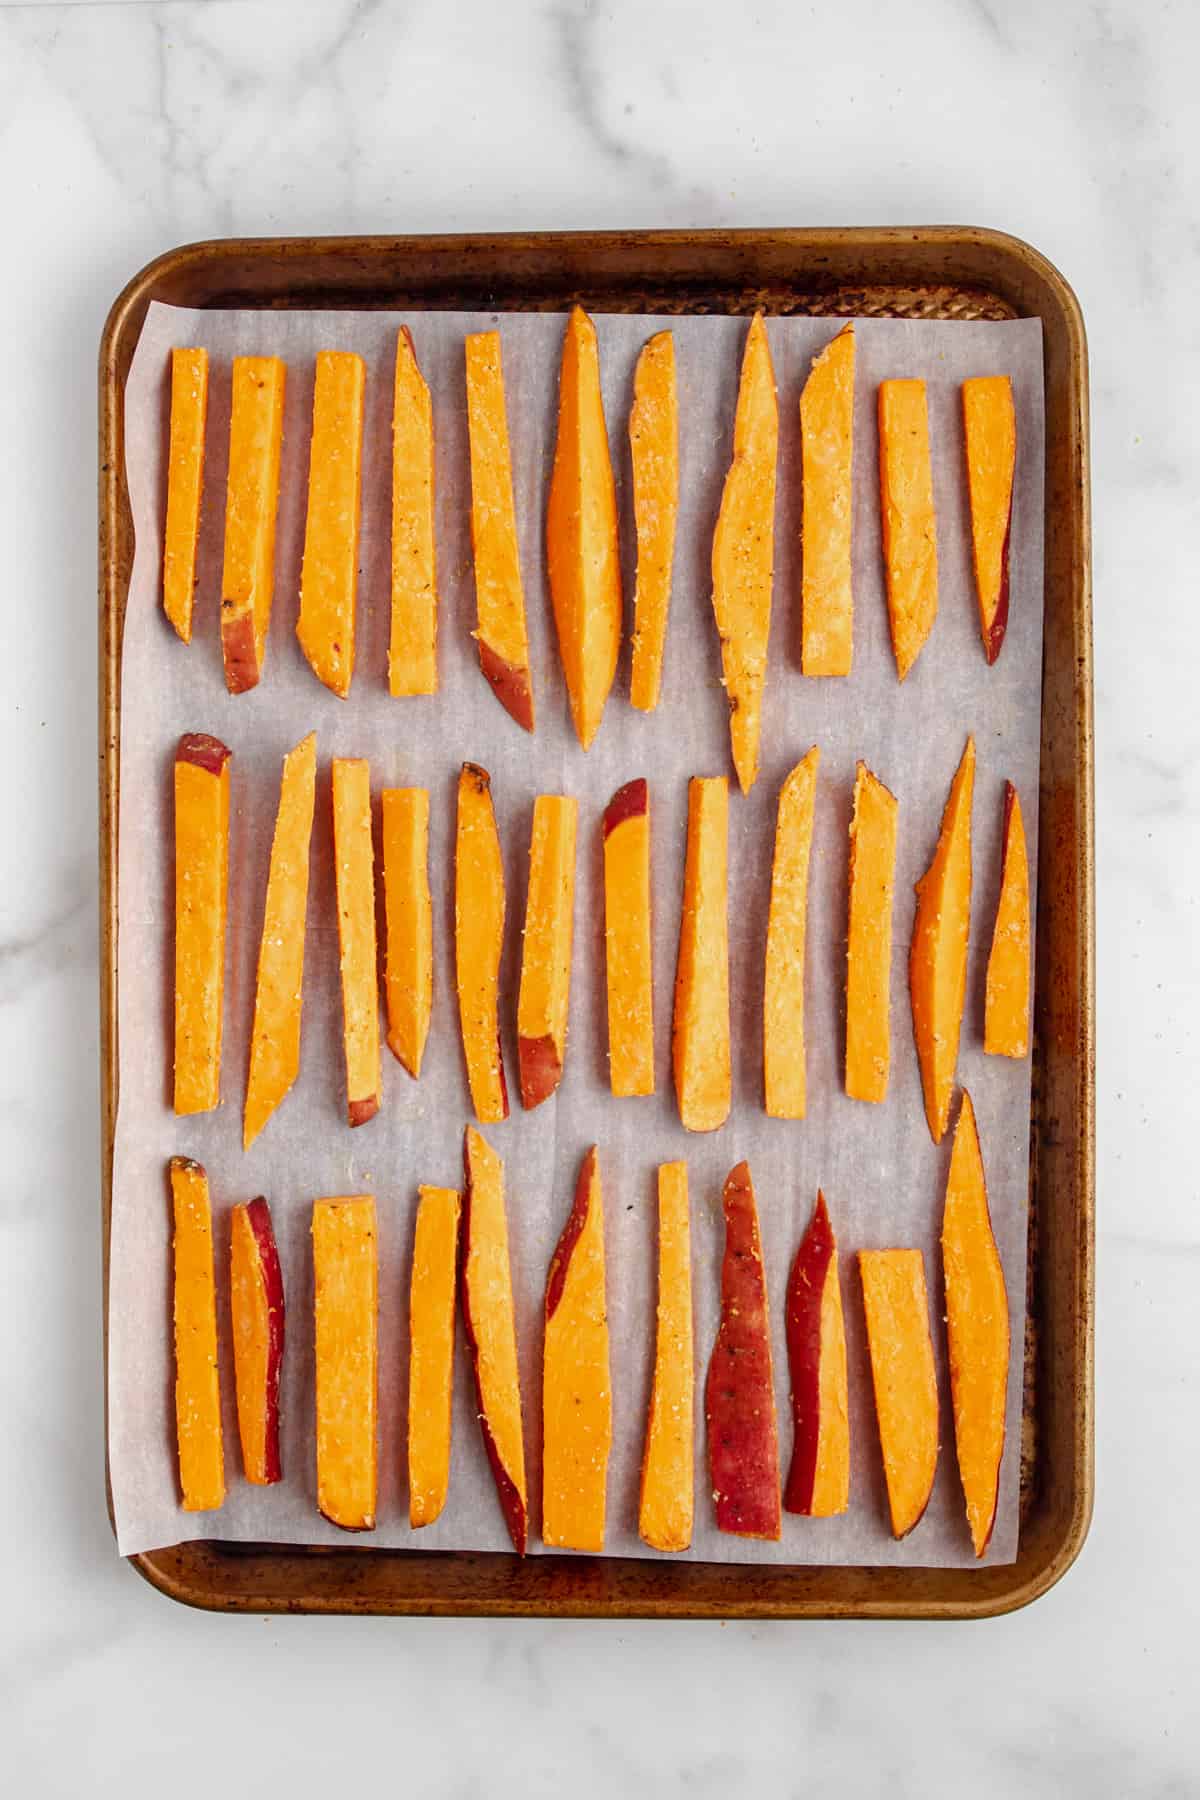 Sweet potato fries on a baking sheet with parchment paper before baking.